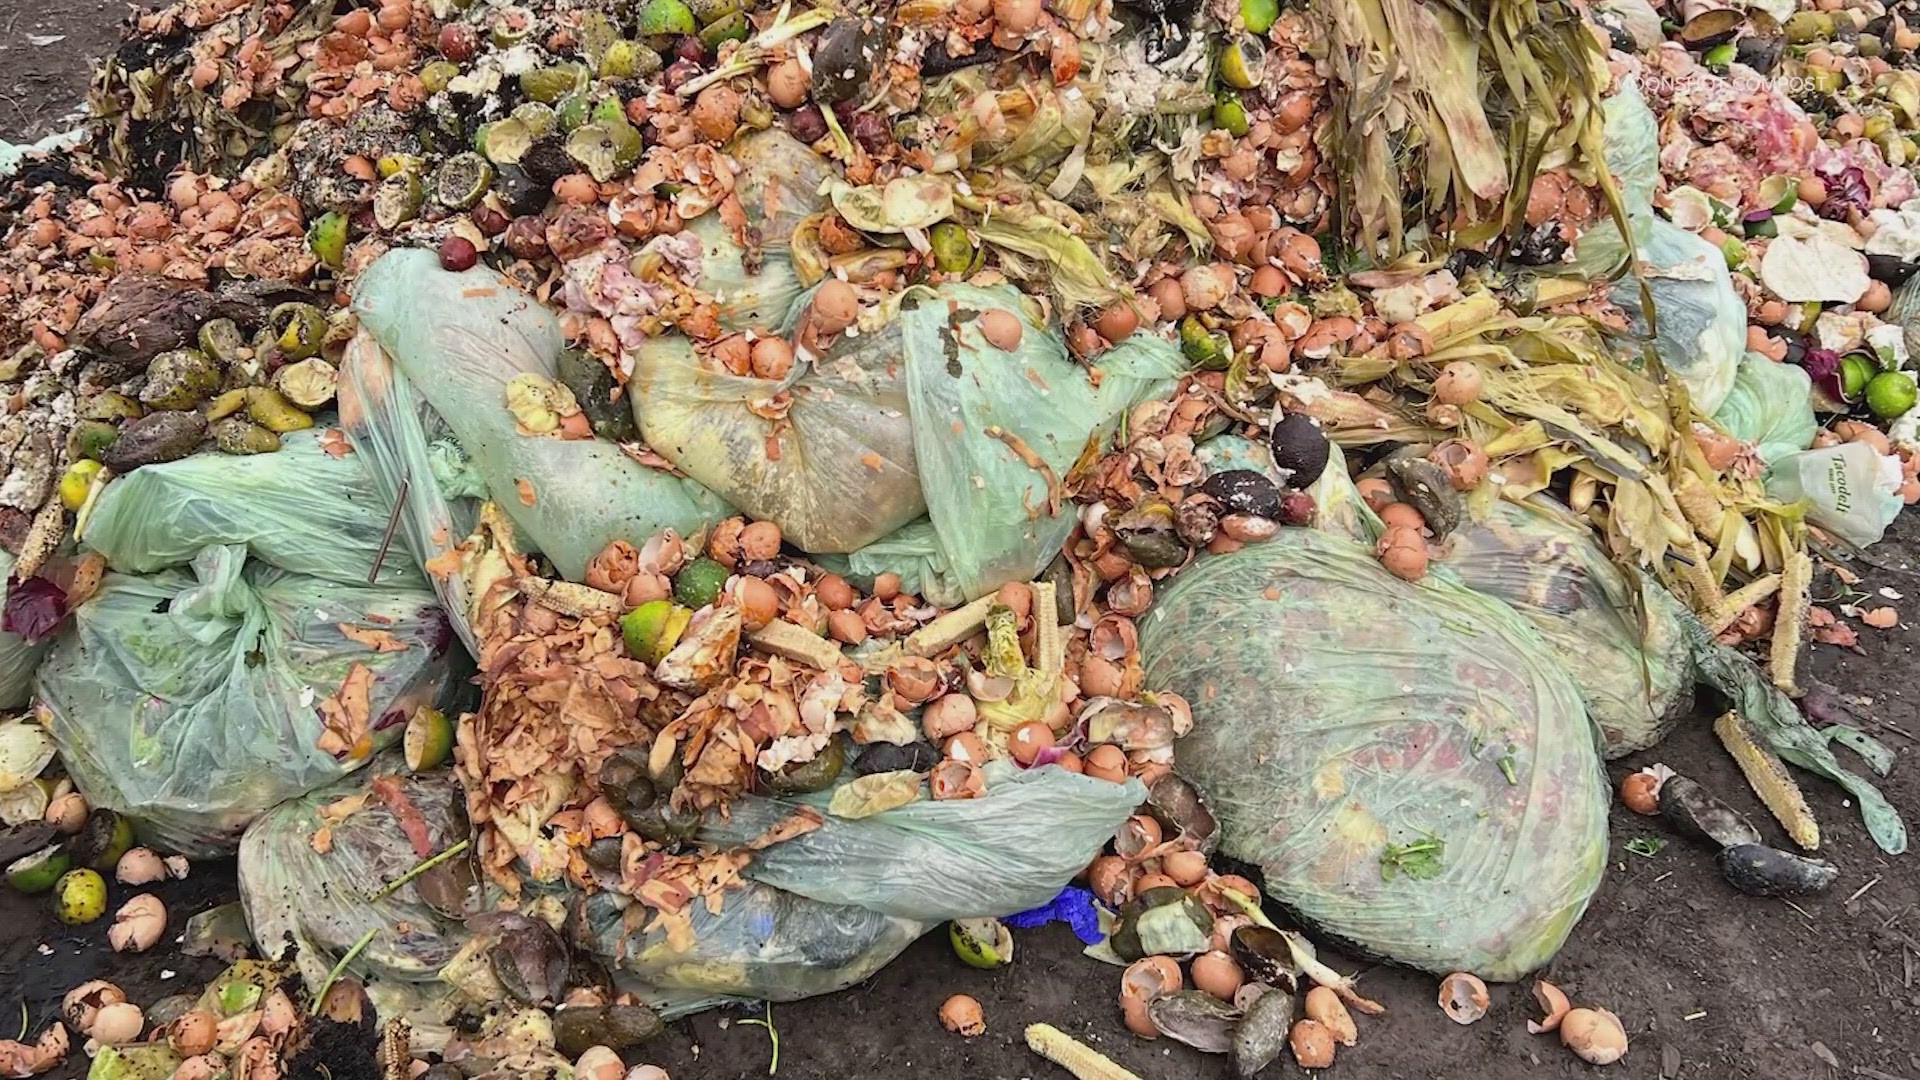 The company collects millions of pounds of food waste around Texas a year.